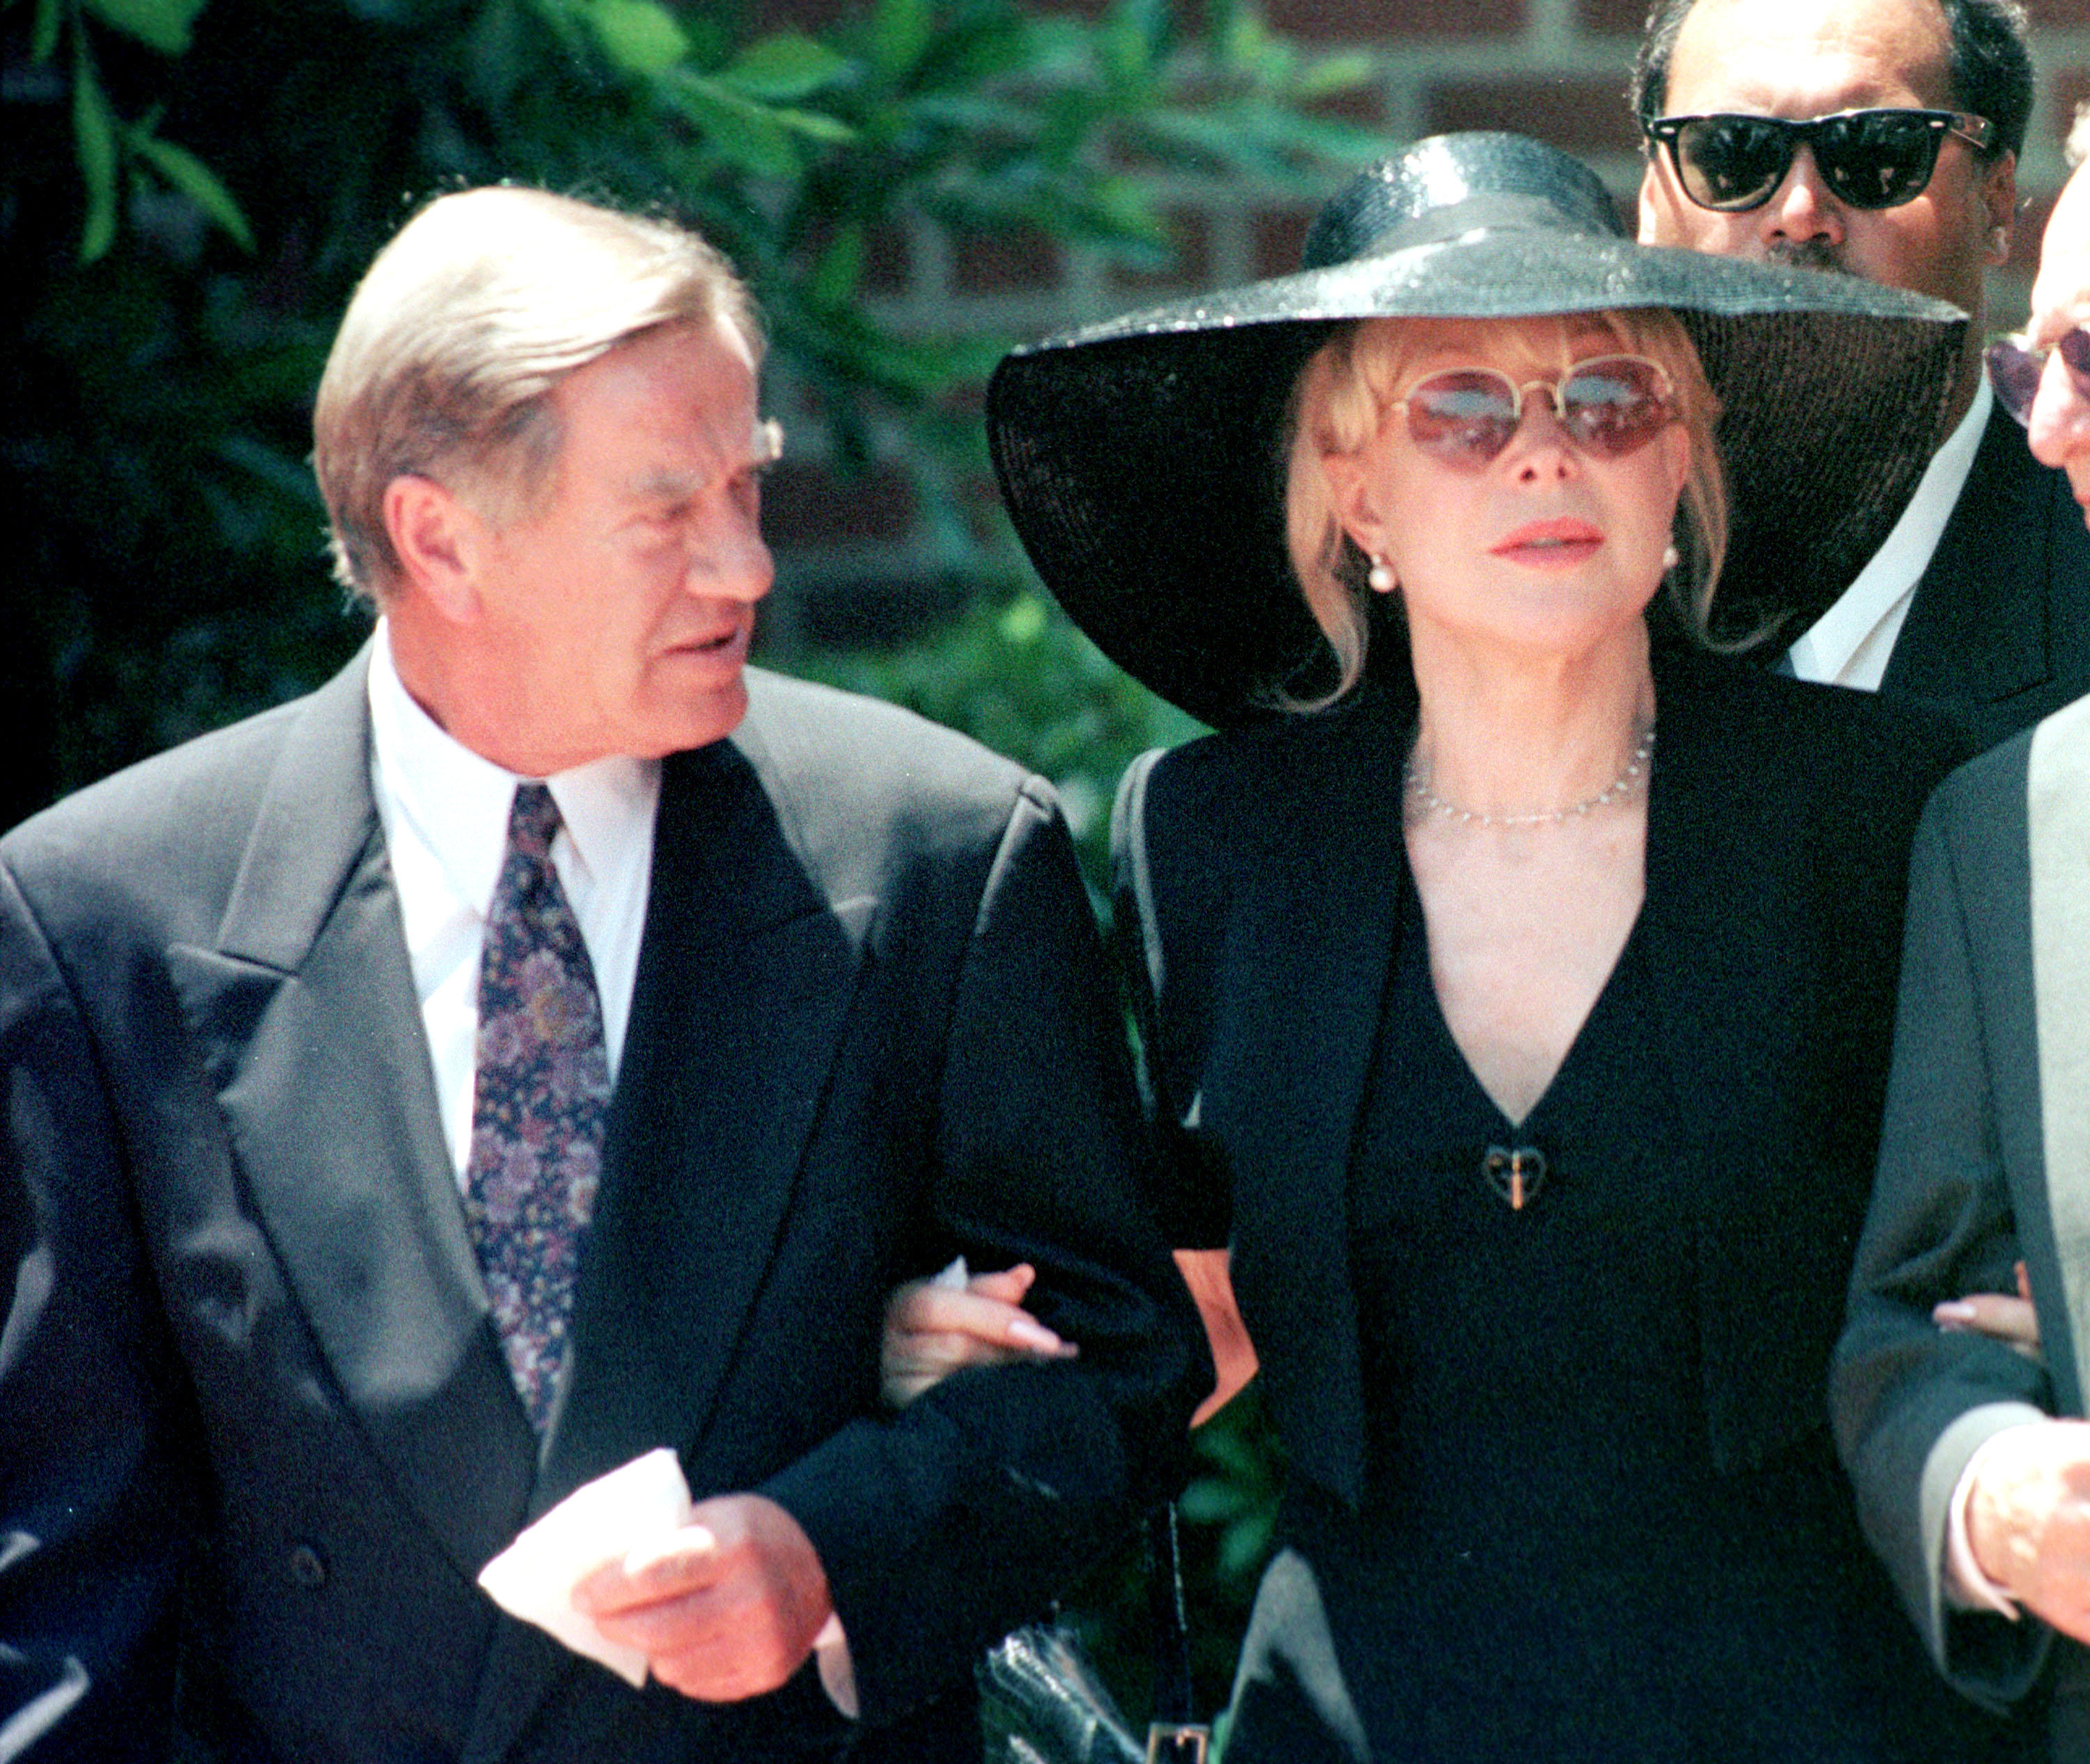 Barbara Eden and her husband Jon Eicholtz leave Matthew Ansara's funeral service on July 2, 2001 in Los Angeles, California | Source: Getty Images